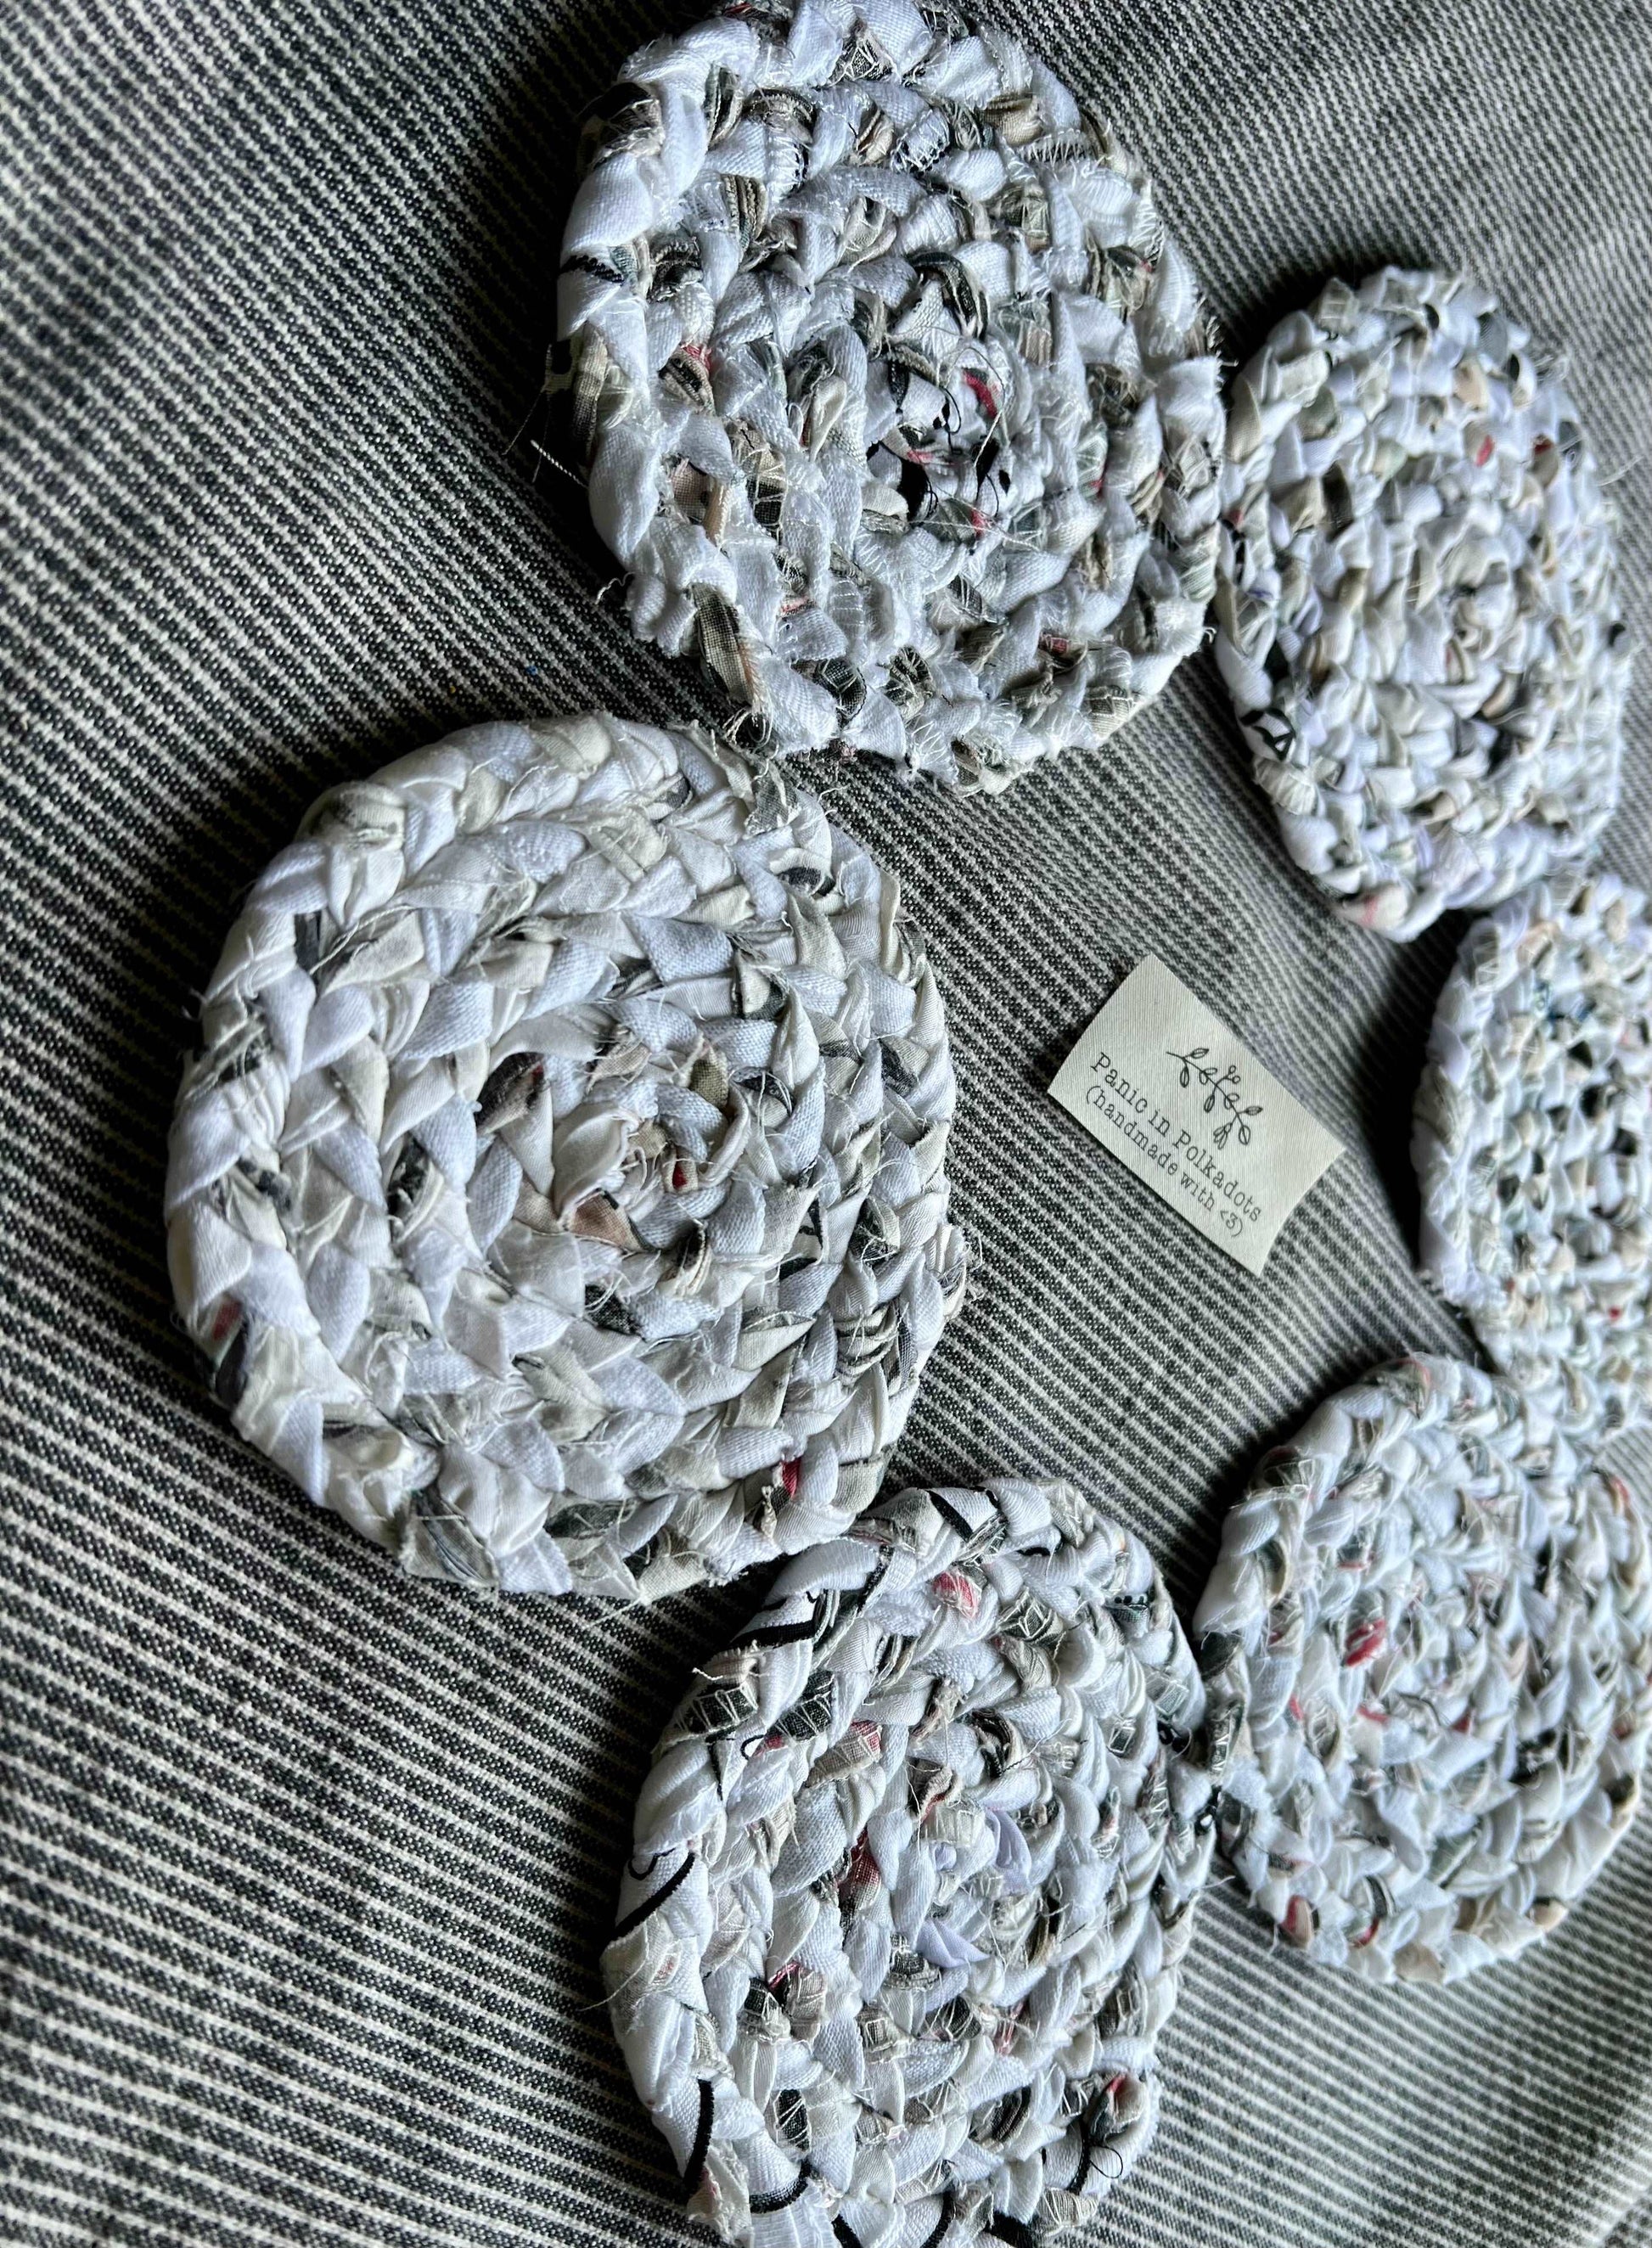 Mini rug coaster set of six, in a circle formation, with a Panic tag in the middle, side view